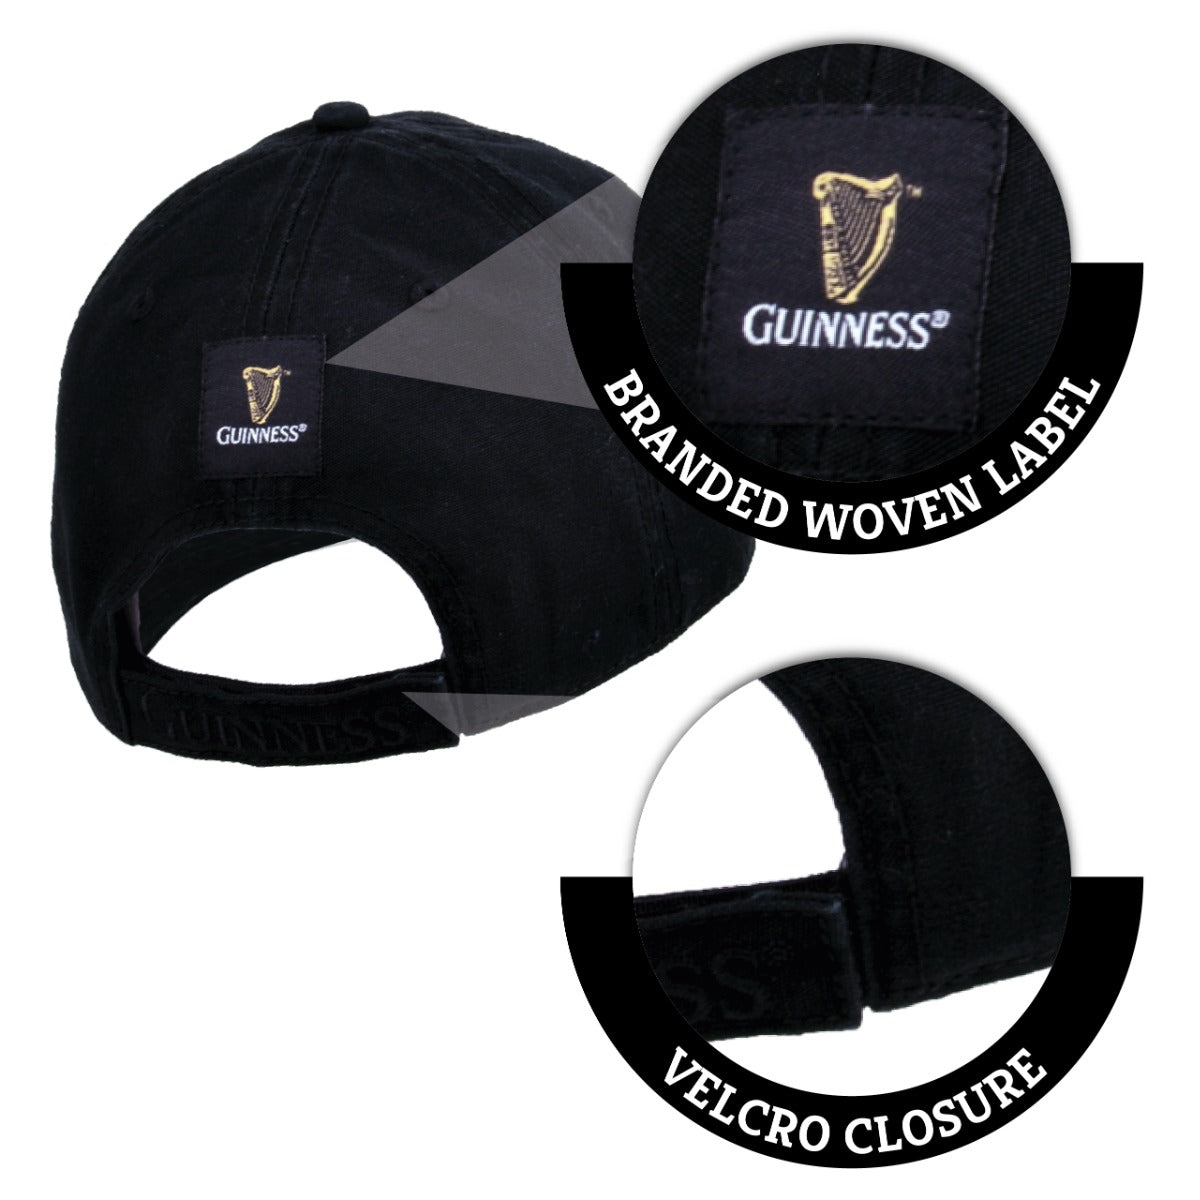 Black Guinness baseball cap: Guinness Black & Caramel Cap with Leather Patch by Guinness.